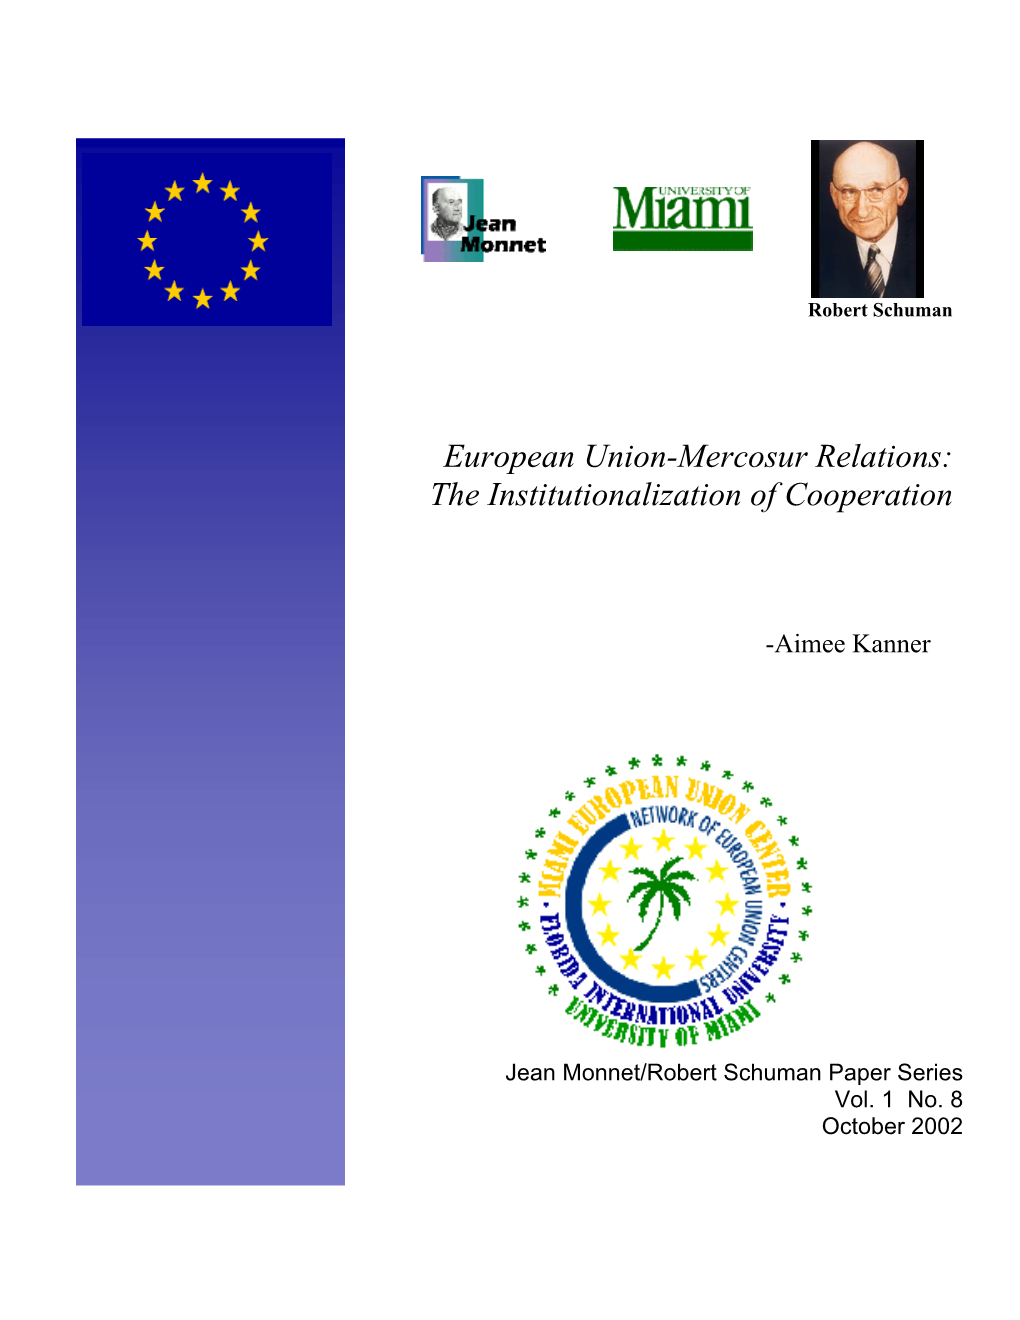 European Union-Mercosur Relations: the Institutionalization of Cooperation